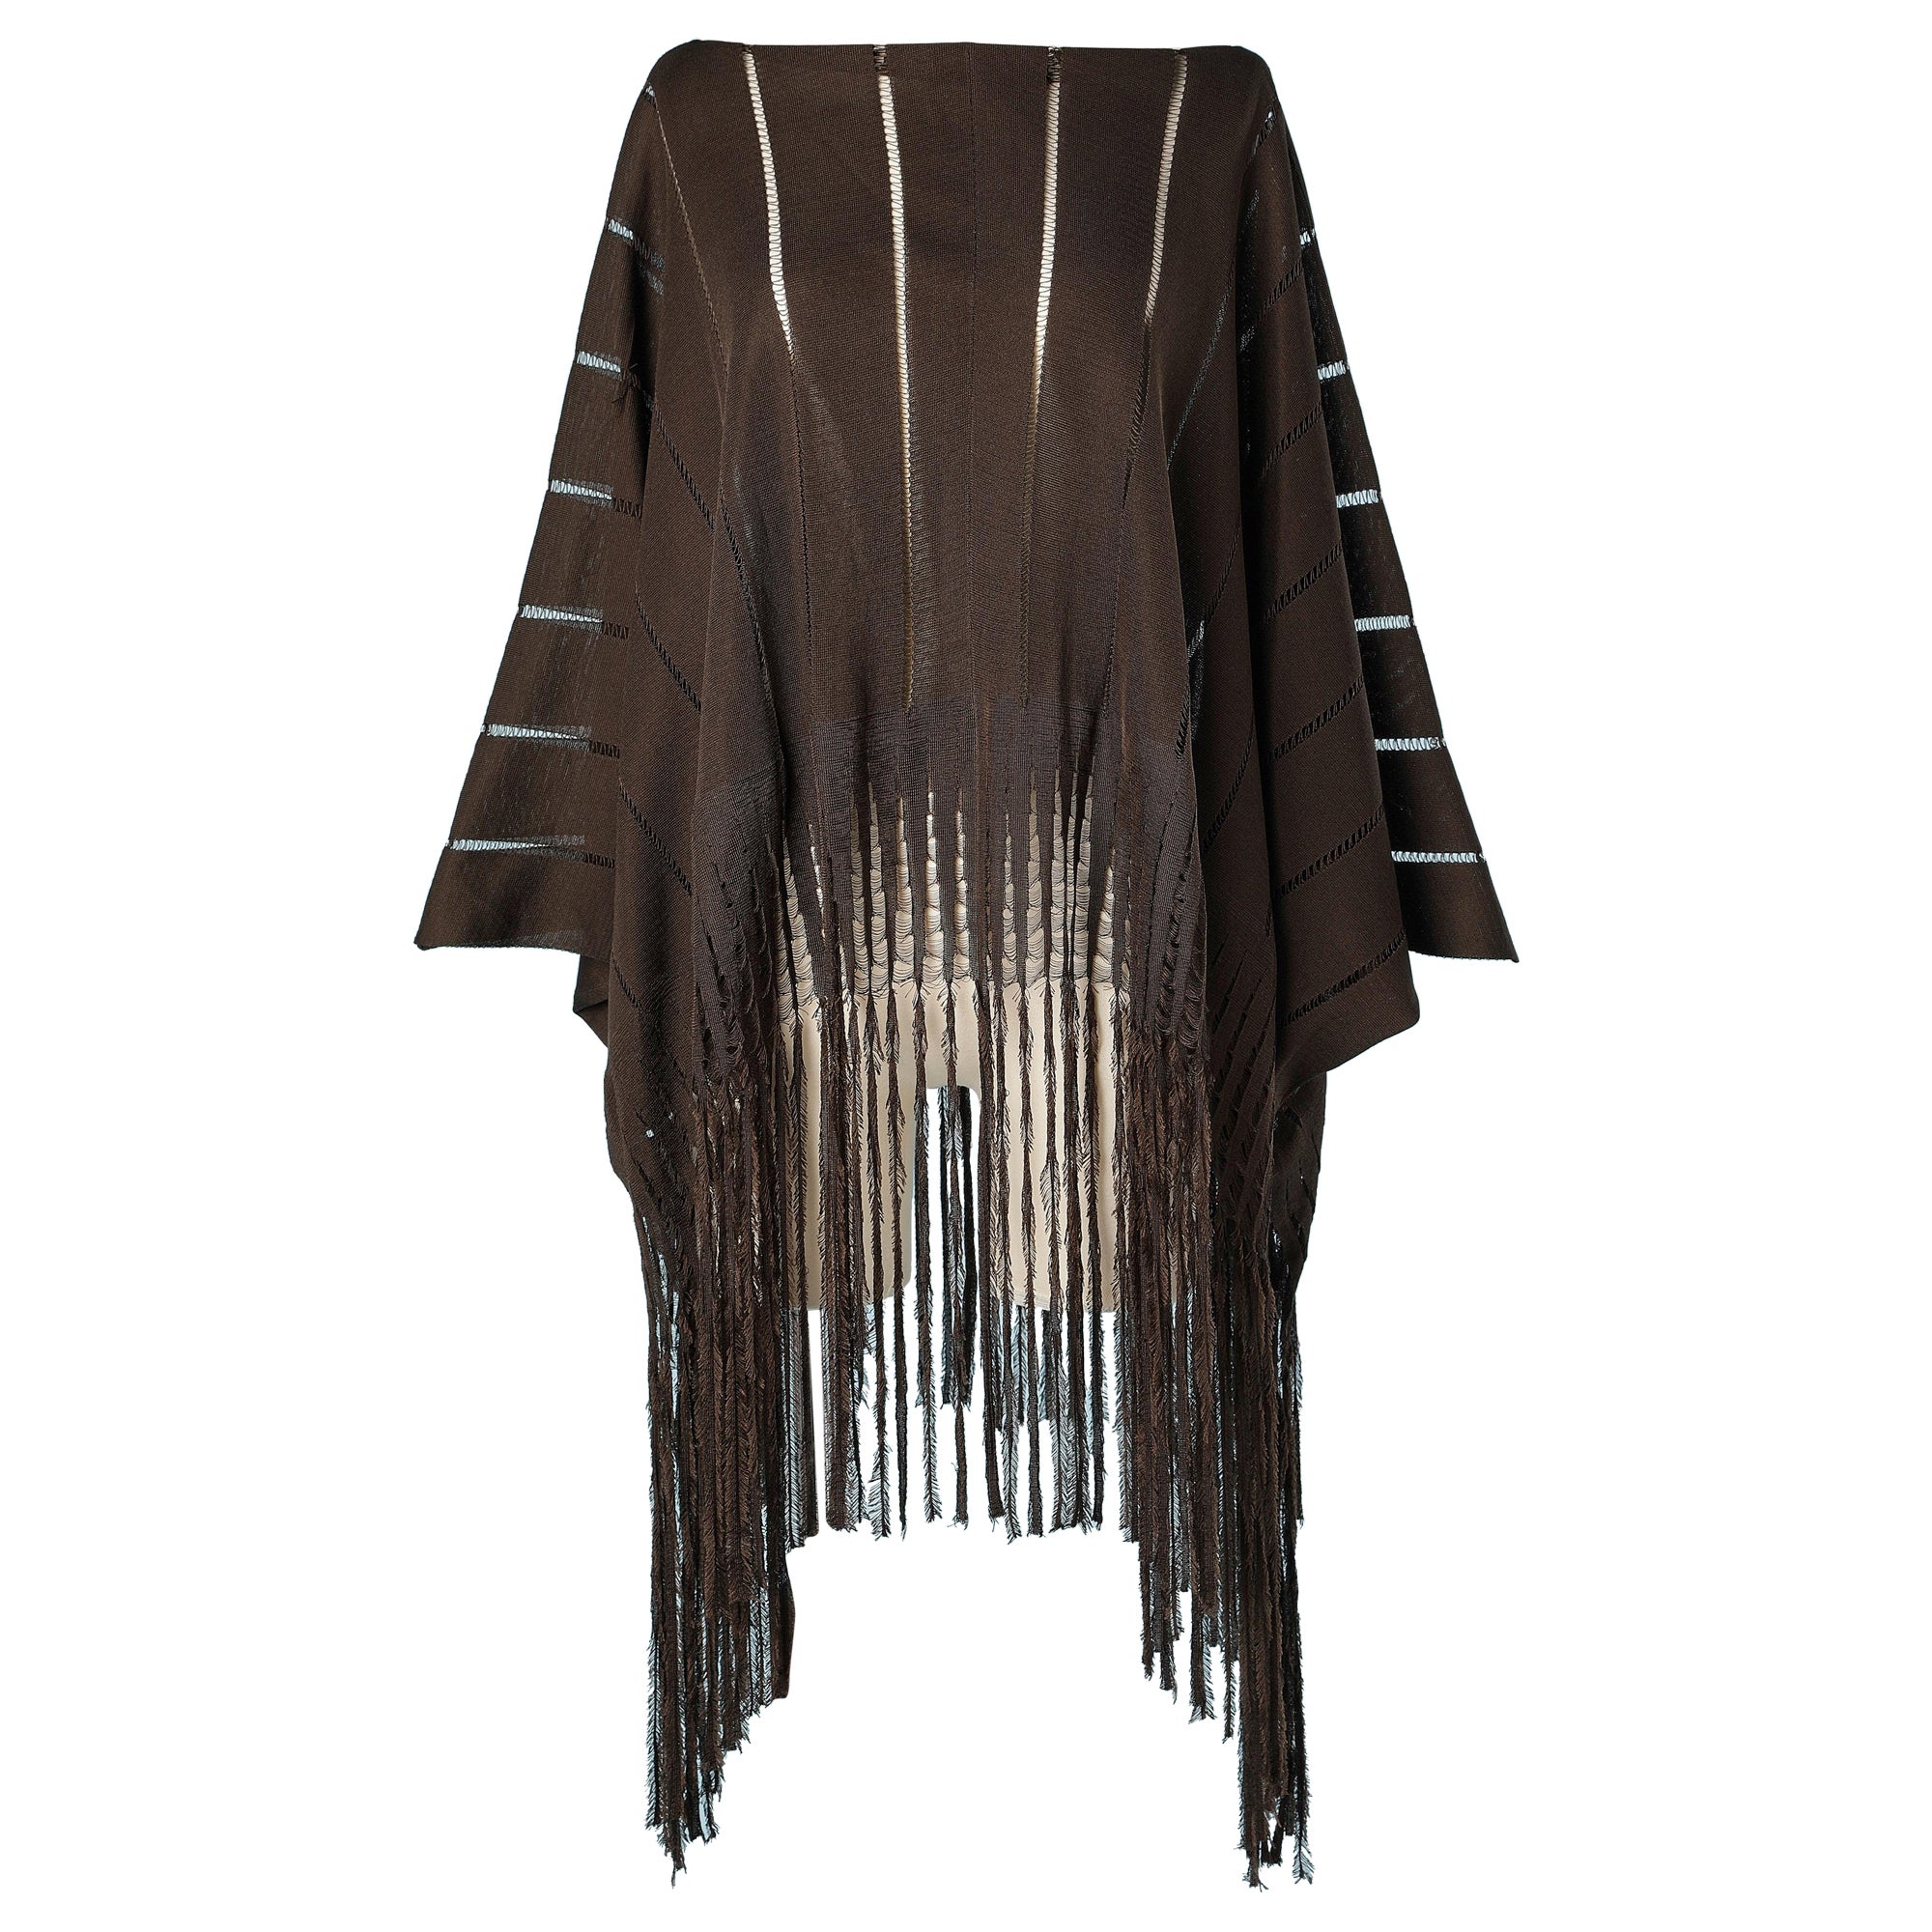 Brown thin knit poncho ended with fringes Yves Saint Laurent Rive gauche 